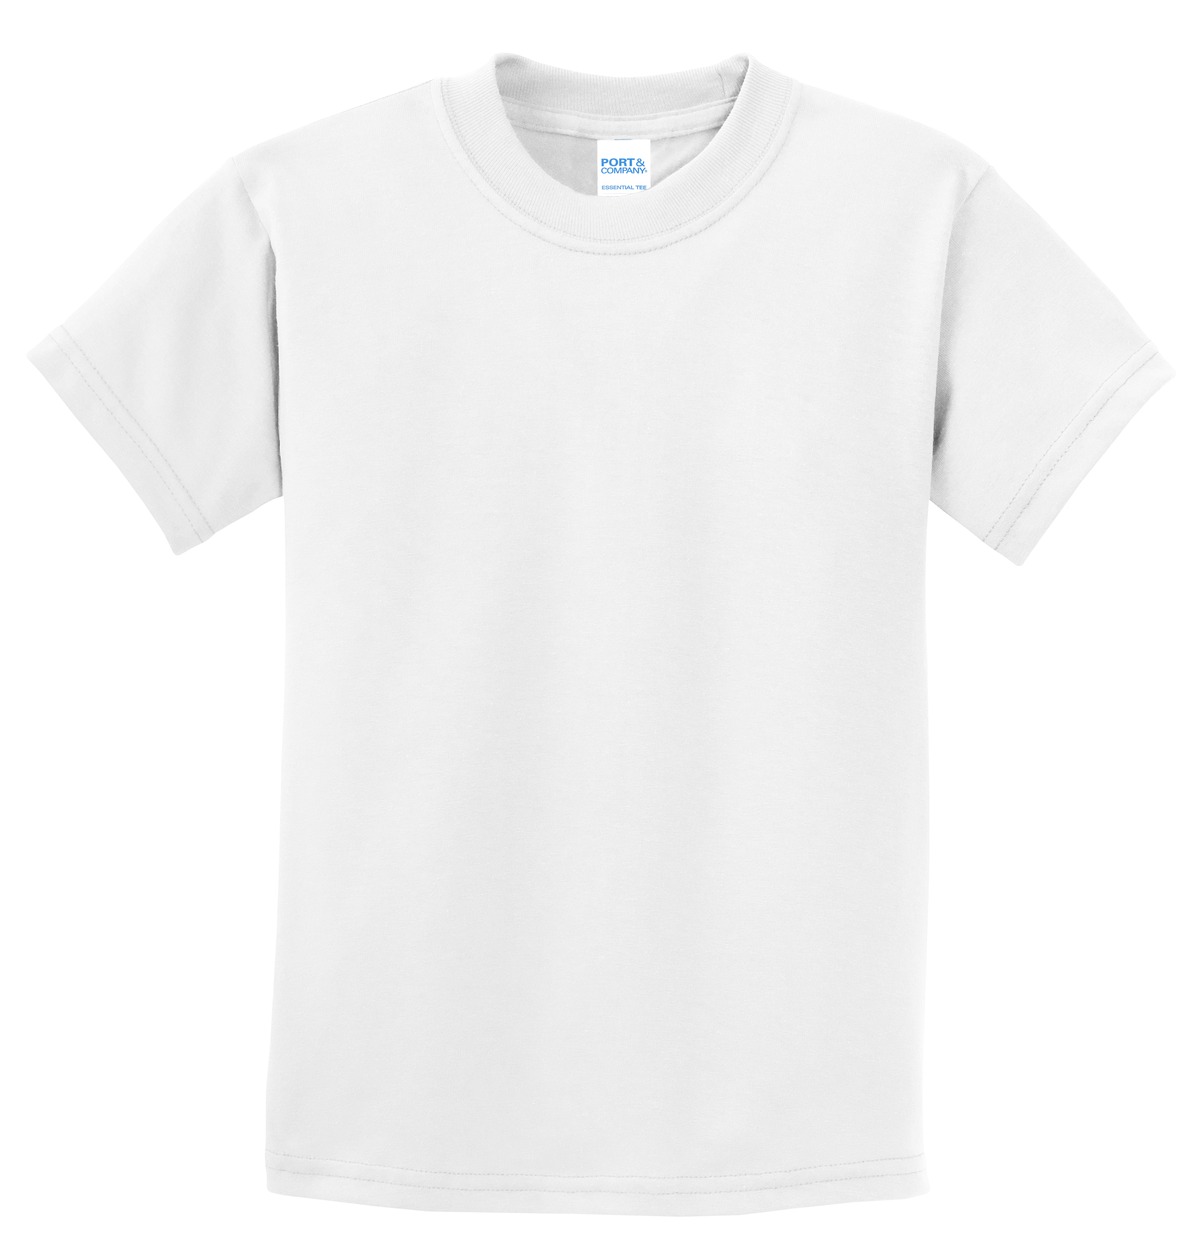 Port & Company ® Youth Essential Tee Questions & Answers